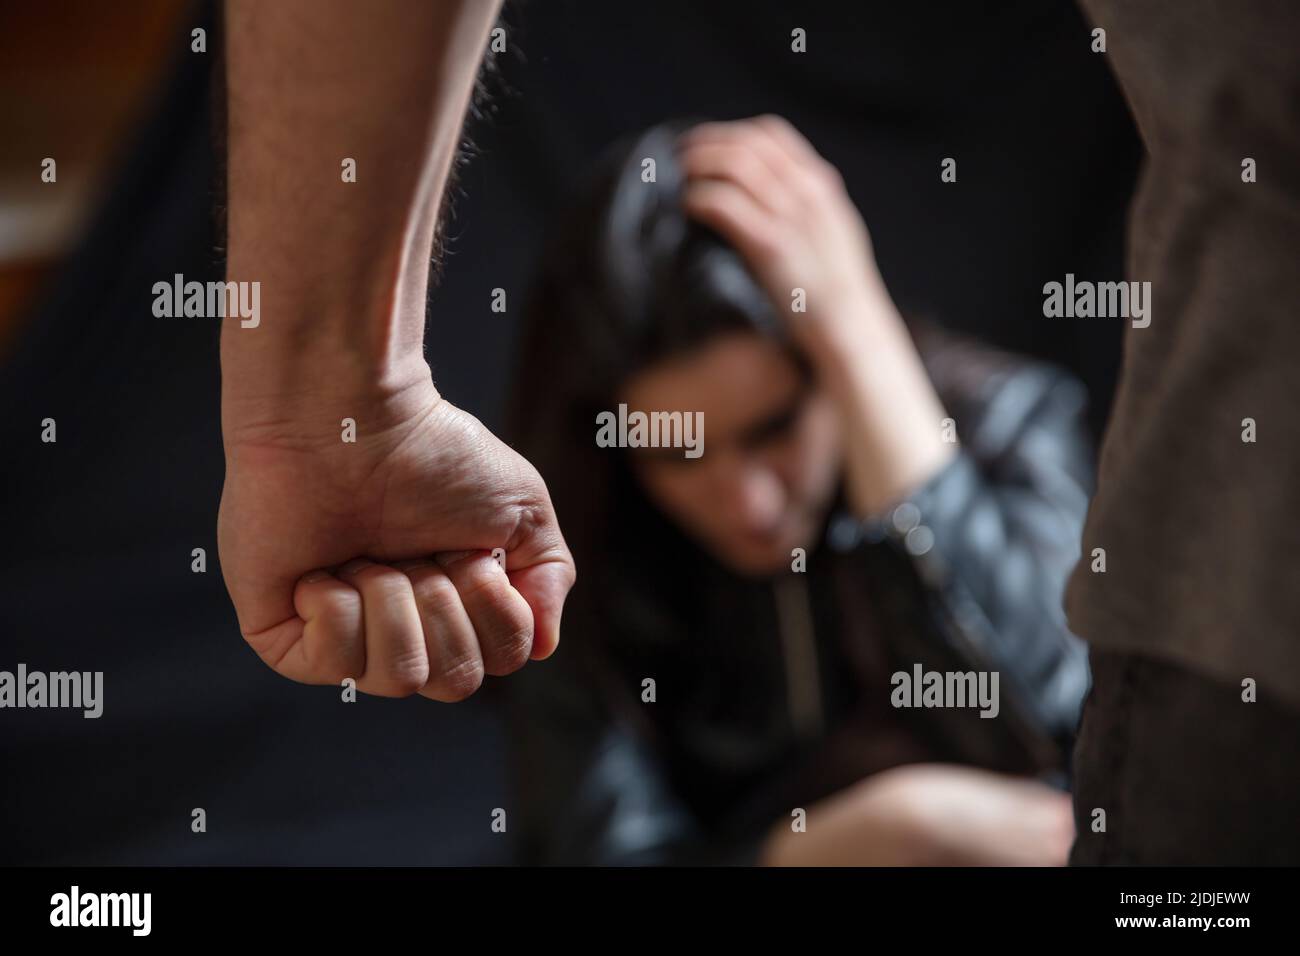 Woman abuse, Young woman scared holding head with hands, male clenched fist close up. Domestic violence, husband against wife. Dark room background Stock Photo